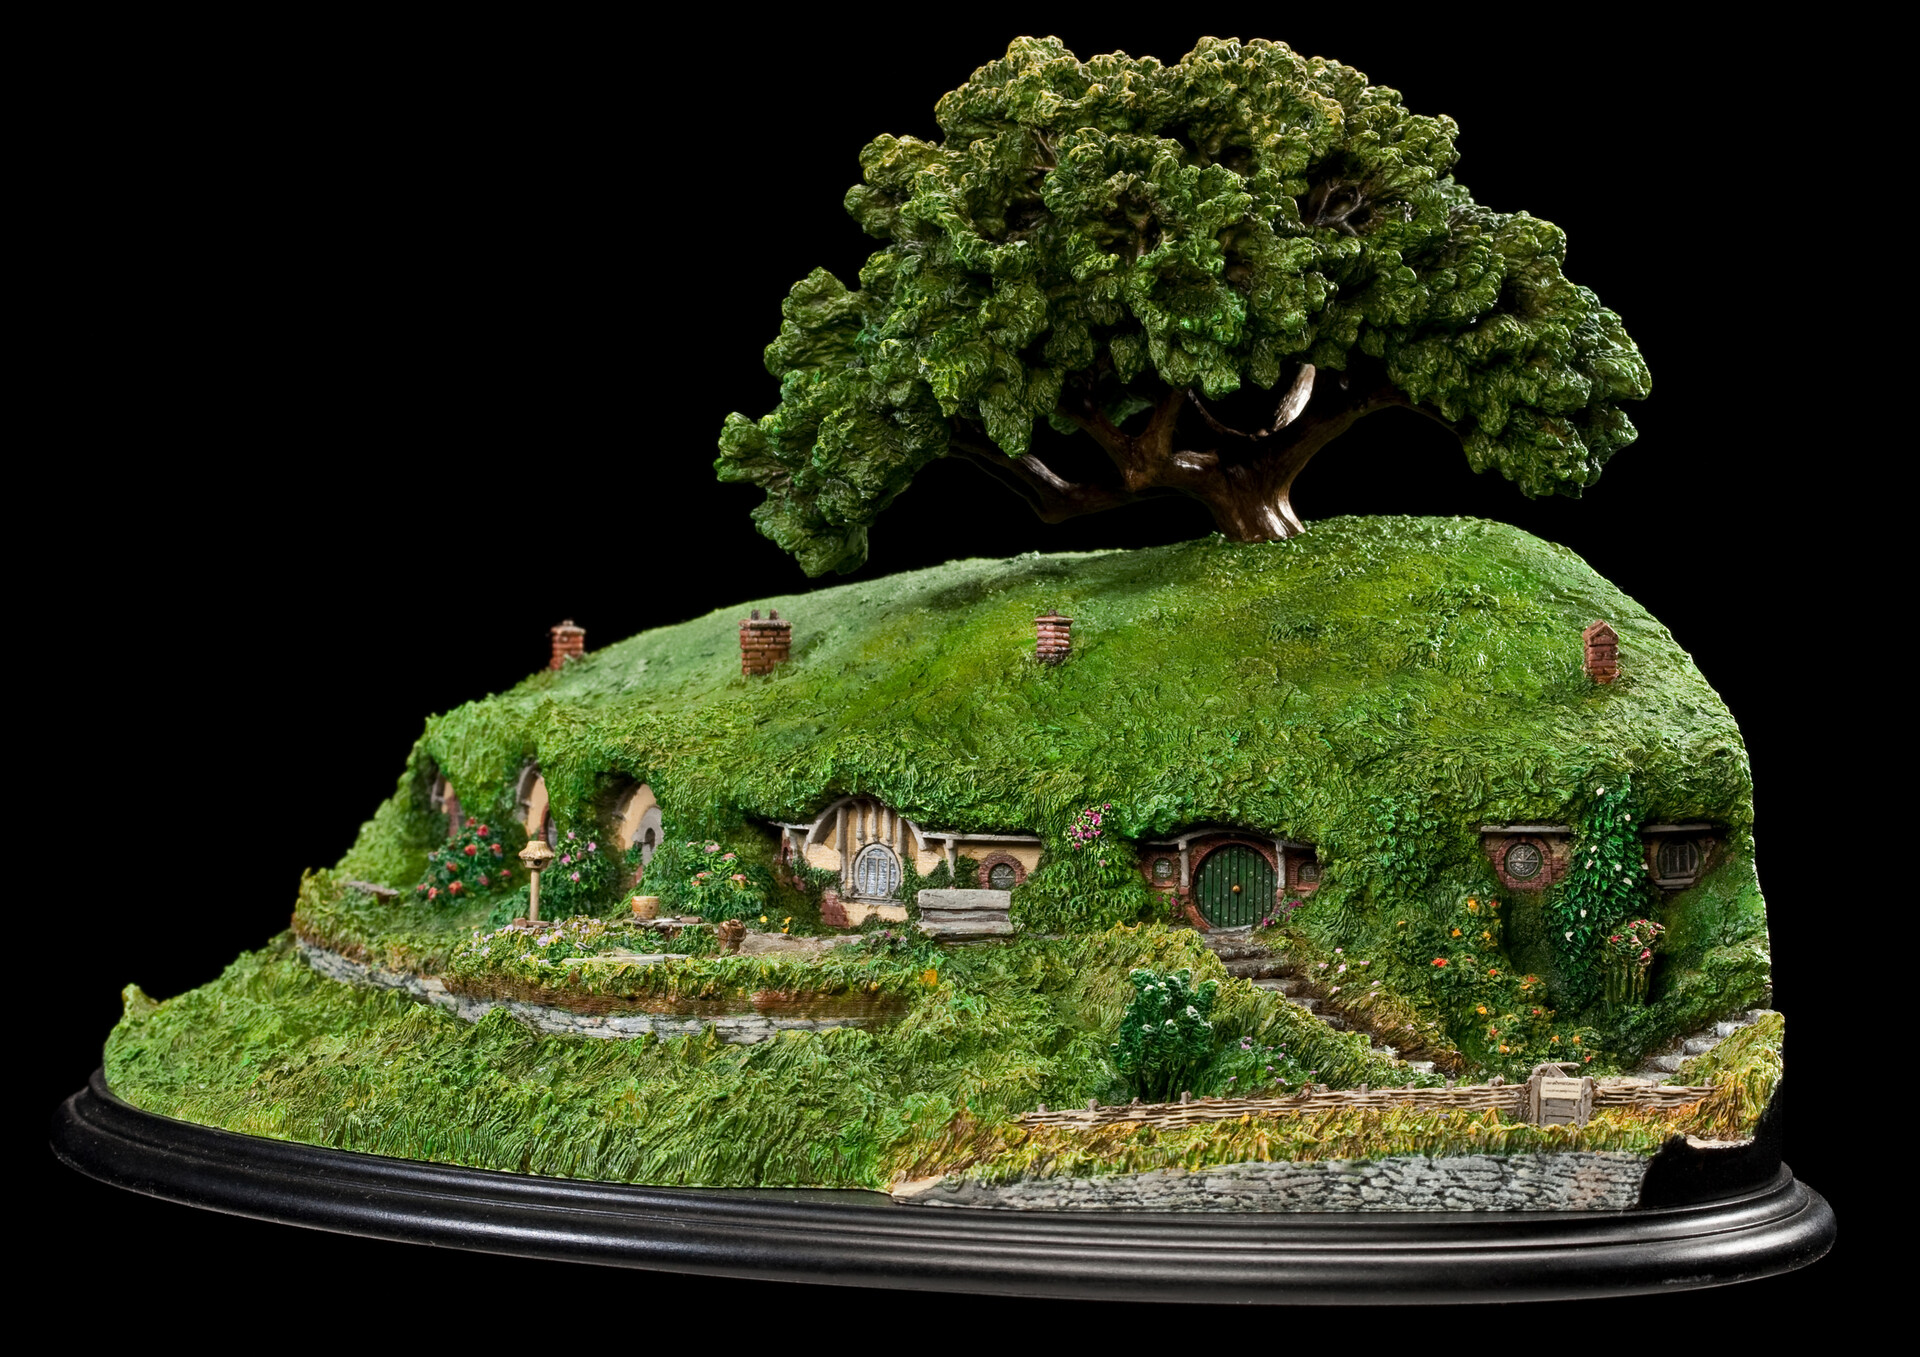 In the Garden of Bag End by MatejCadil on DeviantArt